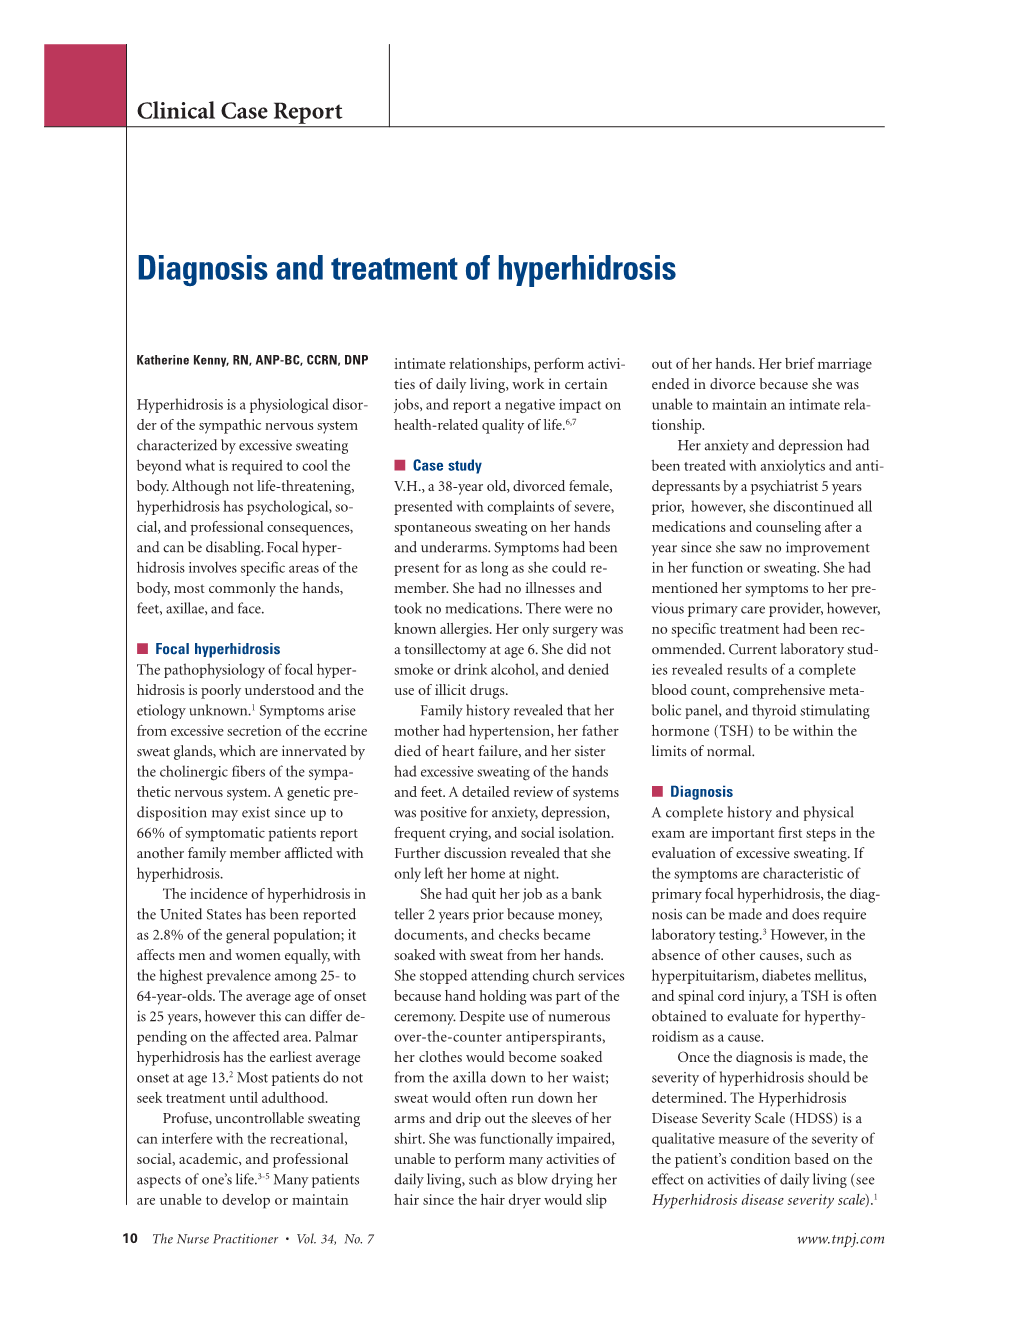 Diagnosis and Treatment of Hyperhidrosis